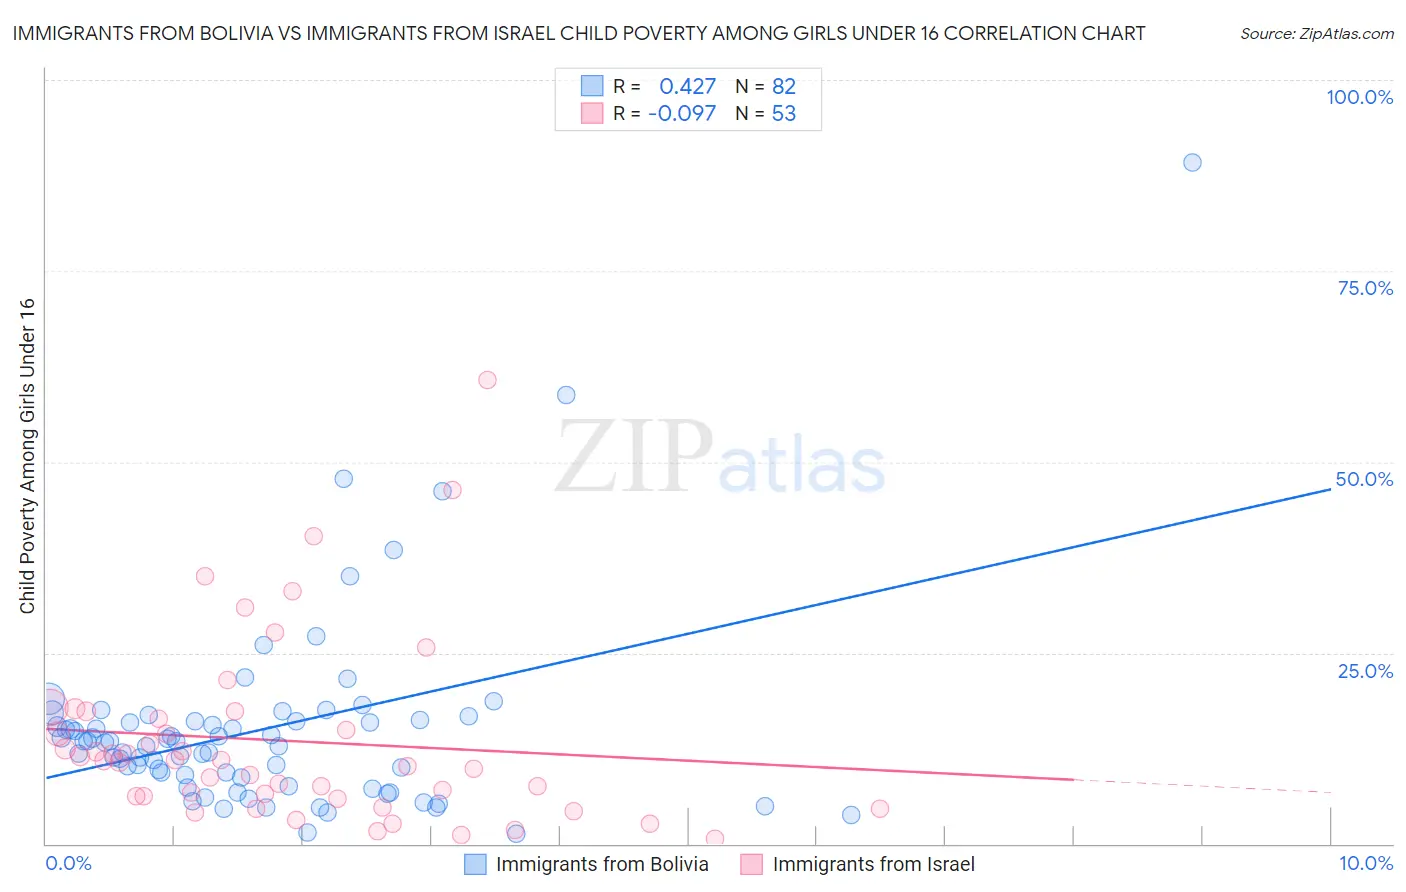 Immigrants from Bolivia vs Immigrants from Israel Child Poverty Among Girls Under 16